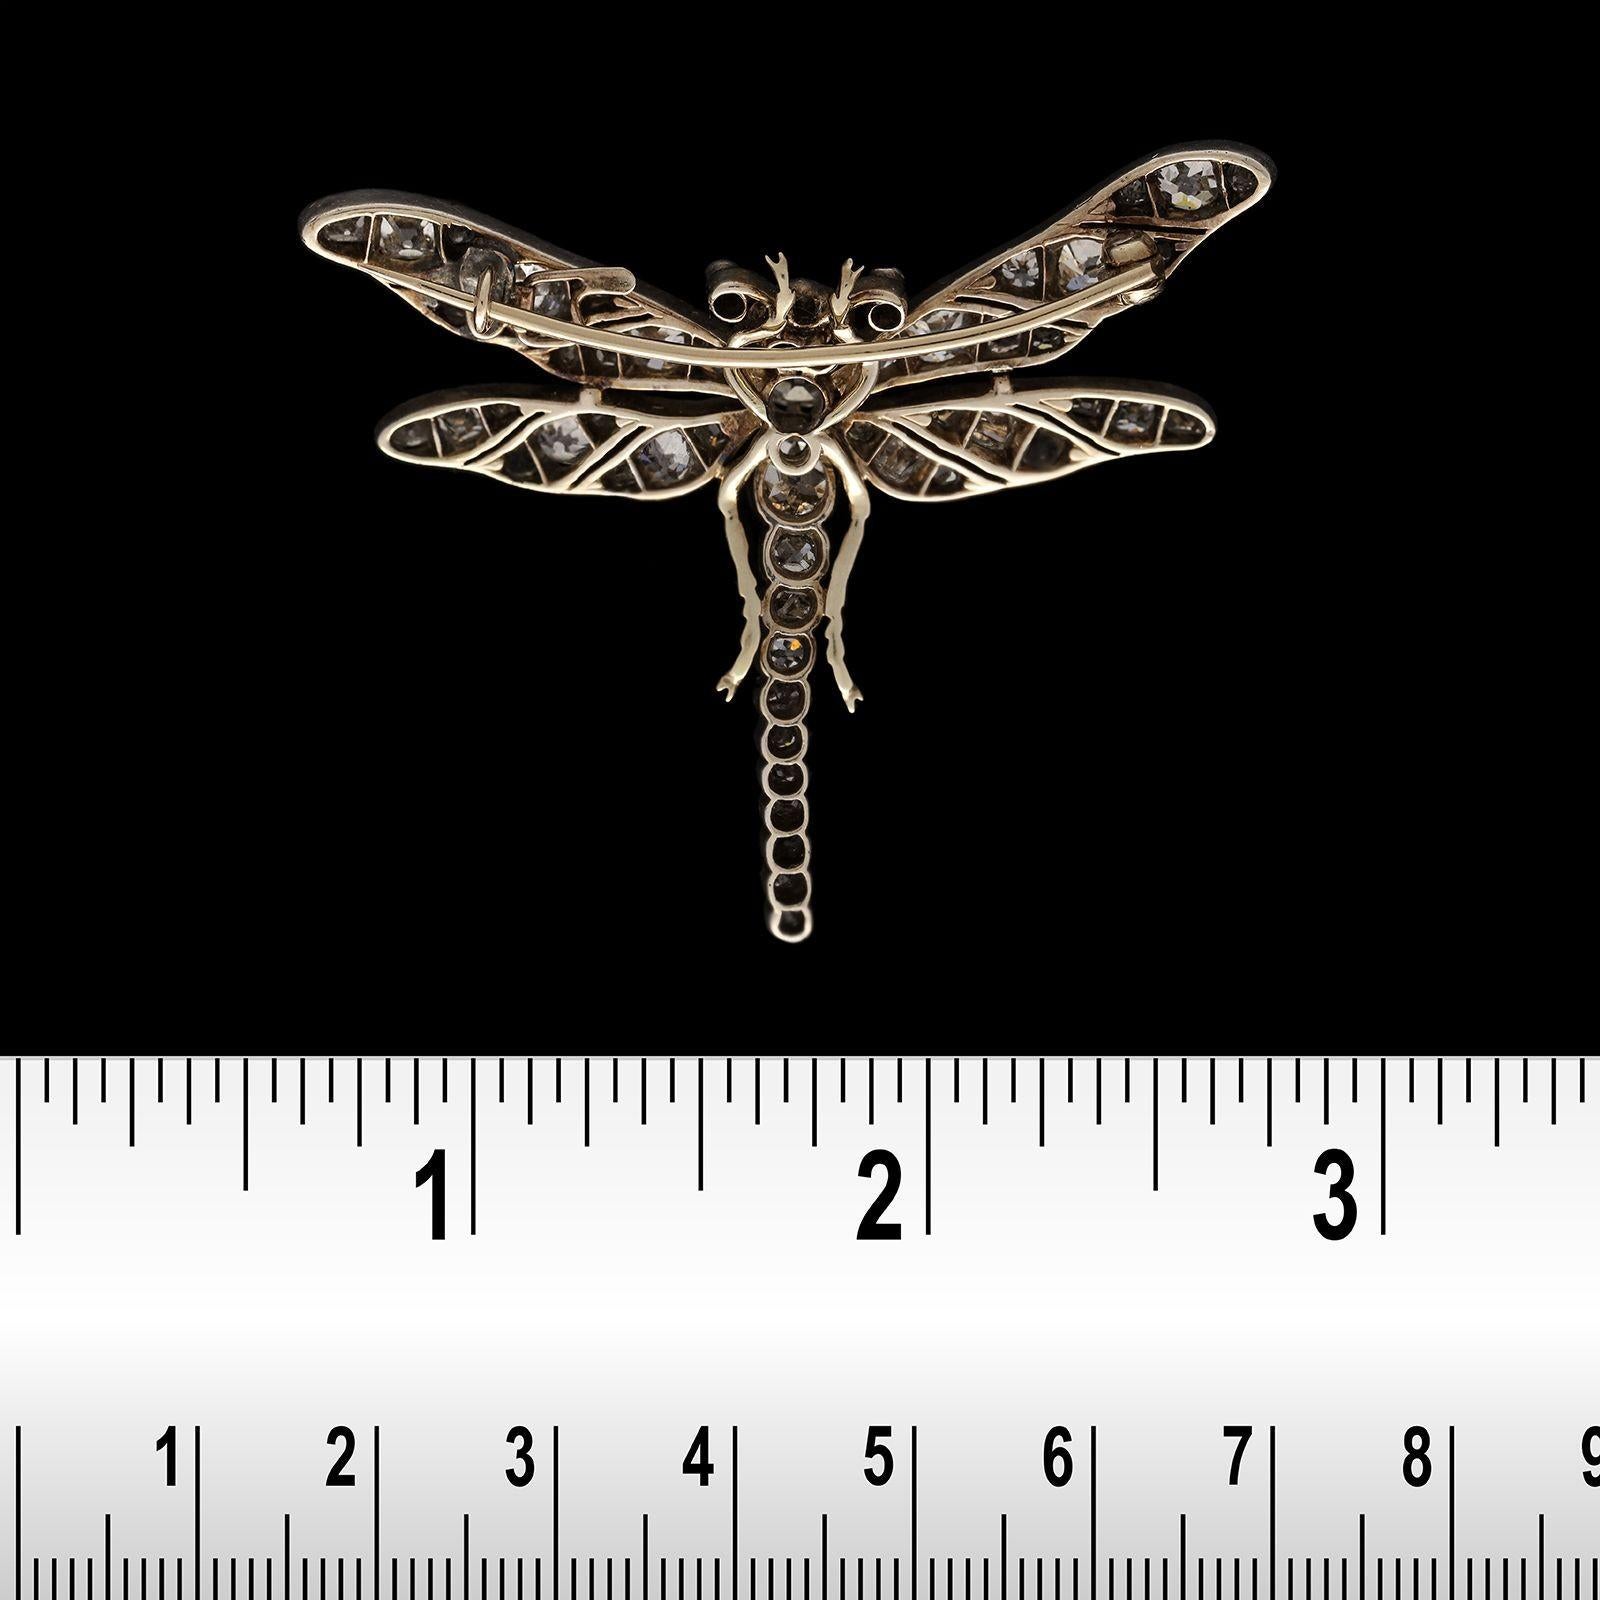 dragonfly brooch meaning